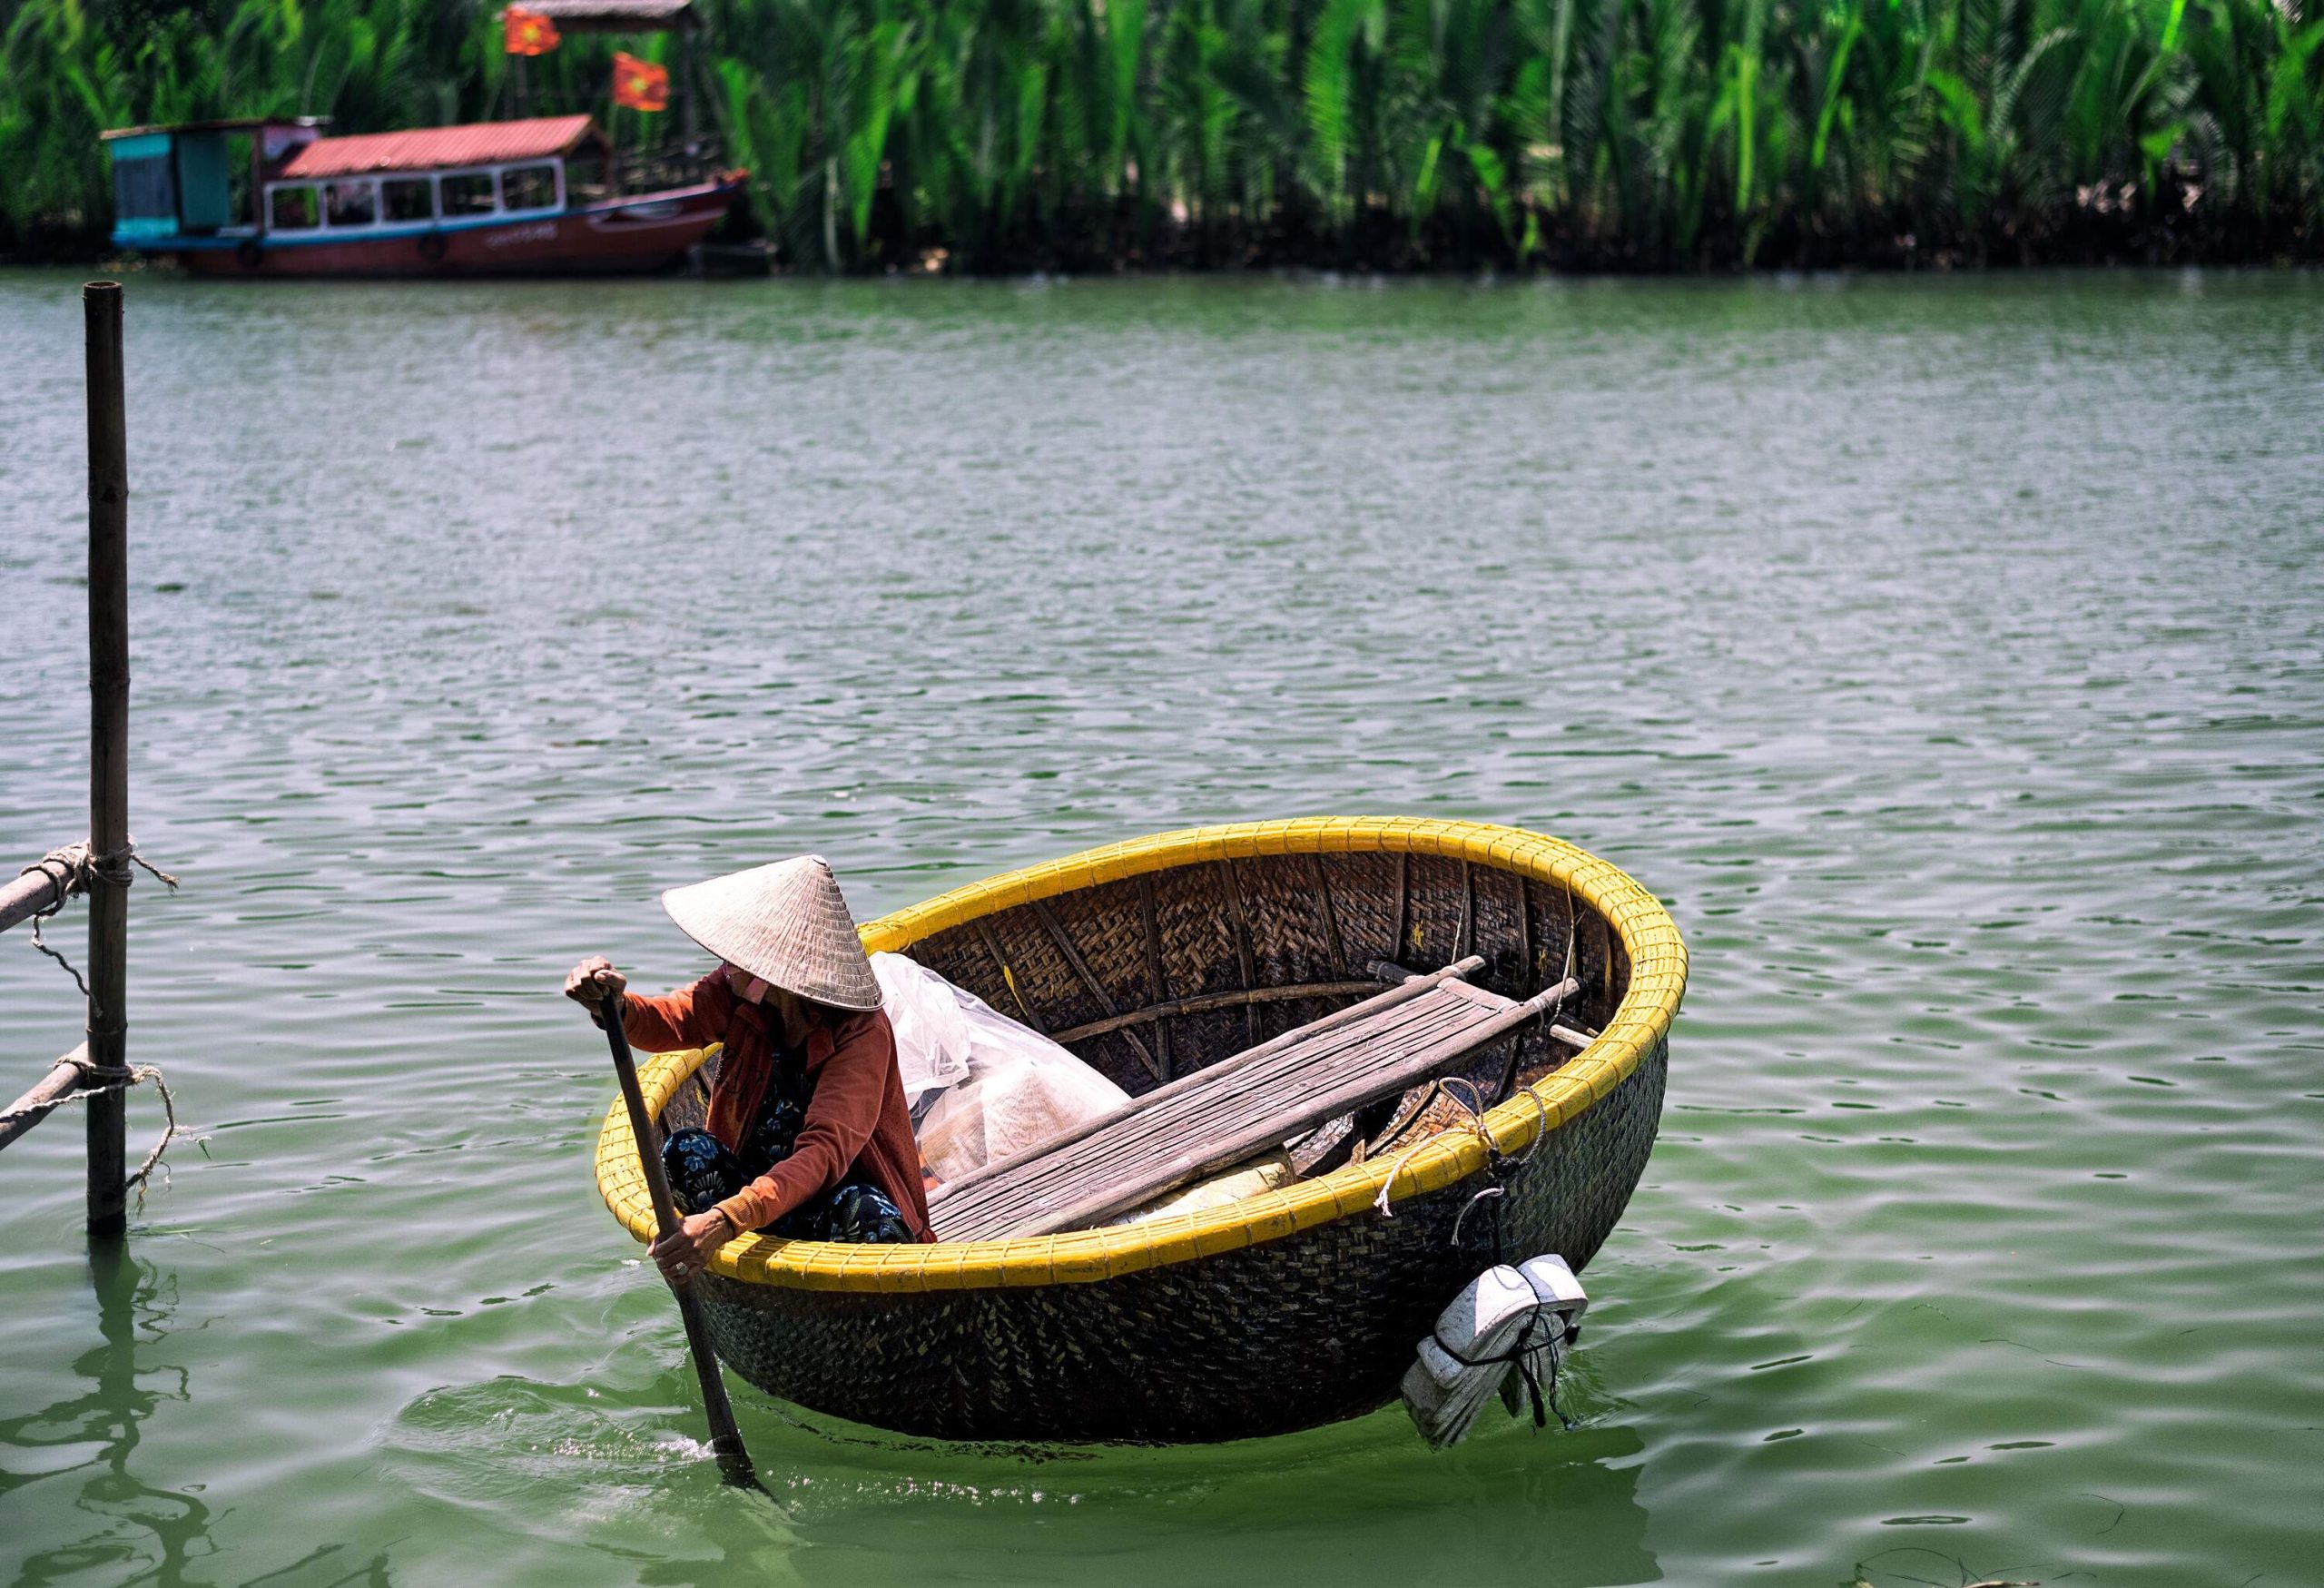 A person in a straw hat rides a circular straw boat and paddles across the river.